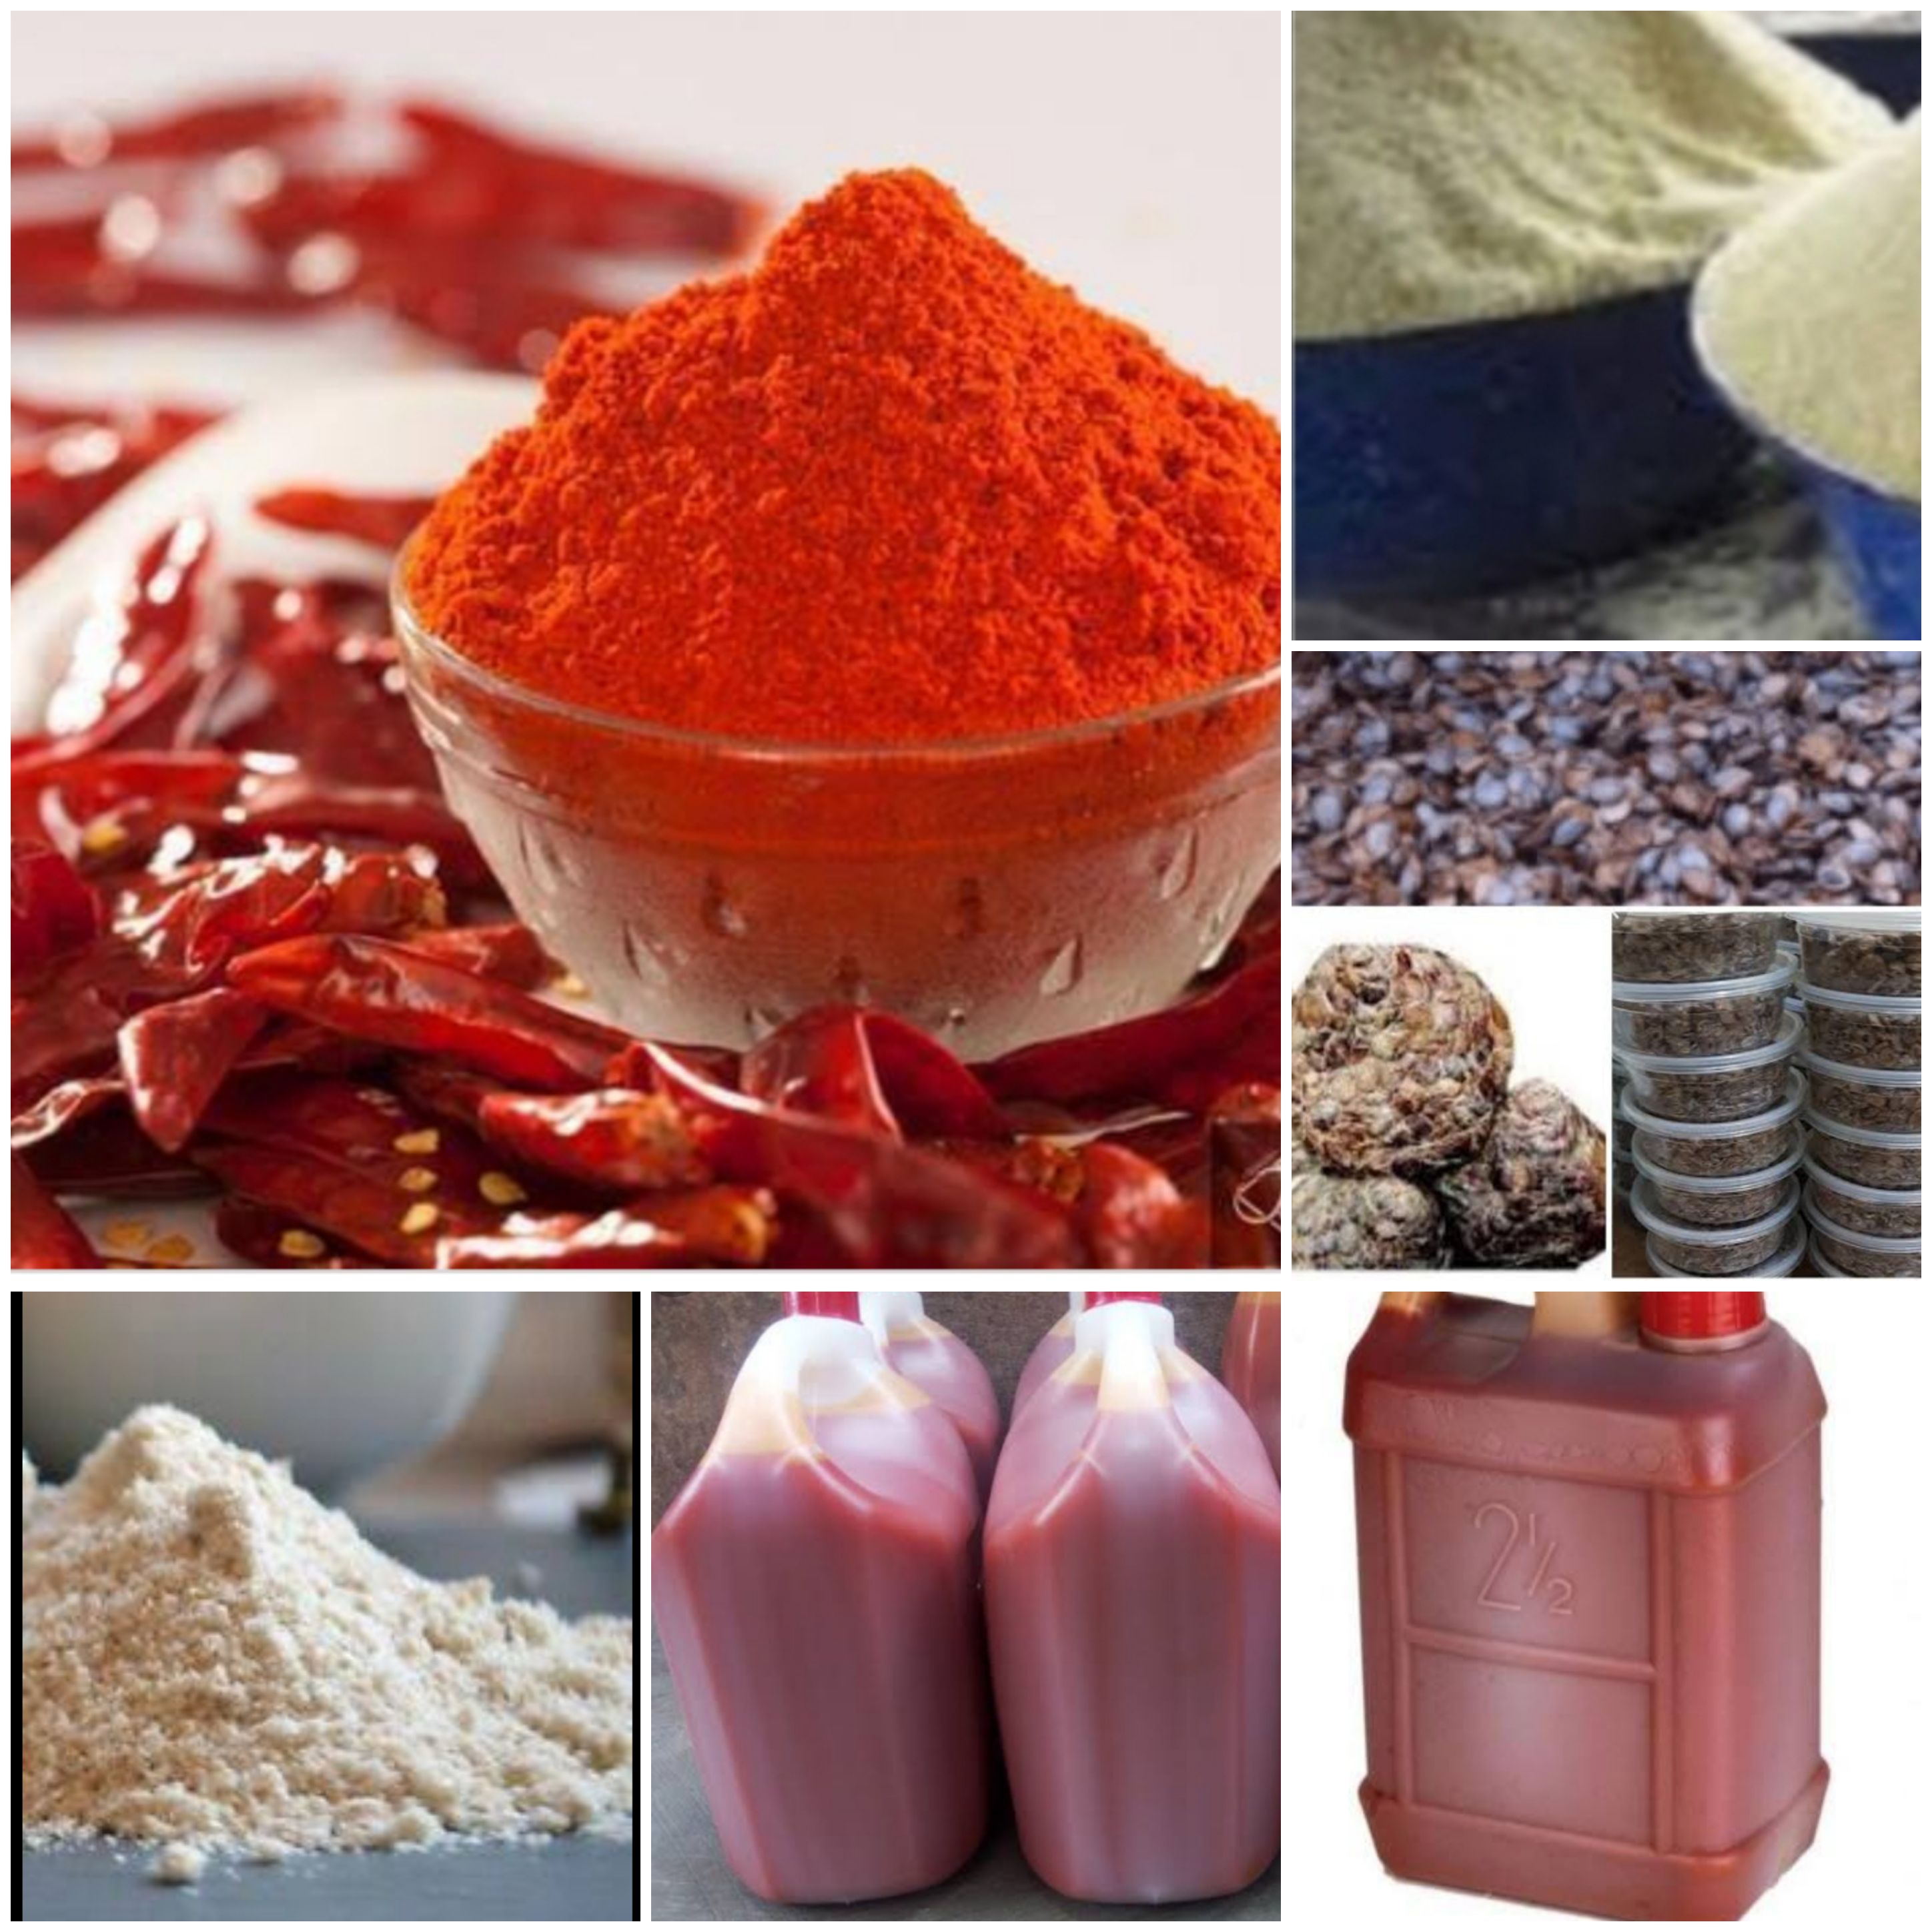 Product image - We are one of the manufacturer and exporter of agrofoods such as Garri, palm oil, locustbeans, ground melon, chilli pepper powder and lots more. We look forward to do business with you.   08132018207 gcagrofoodsproduction@gmail.com